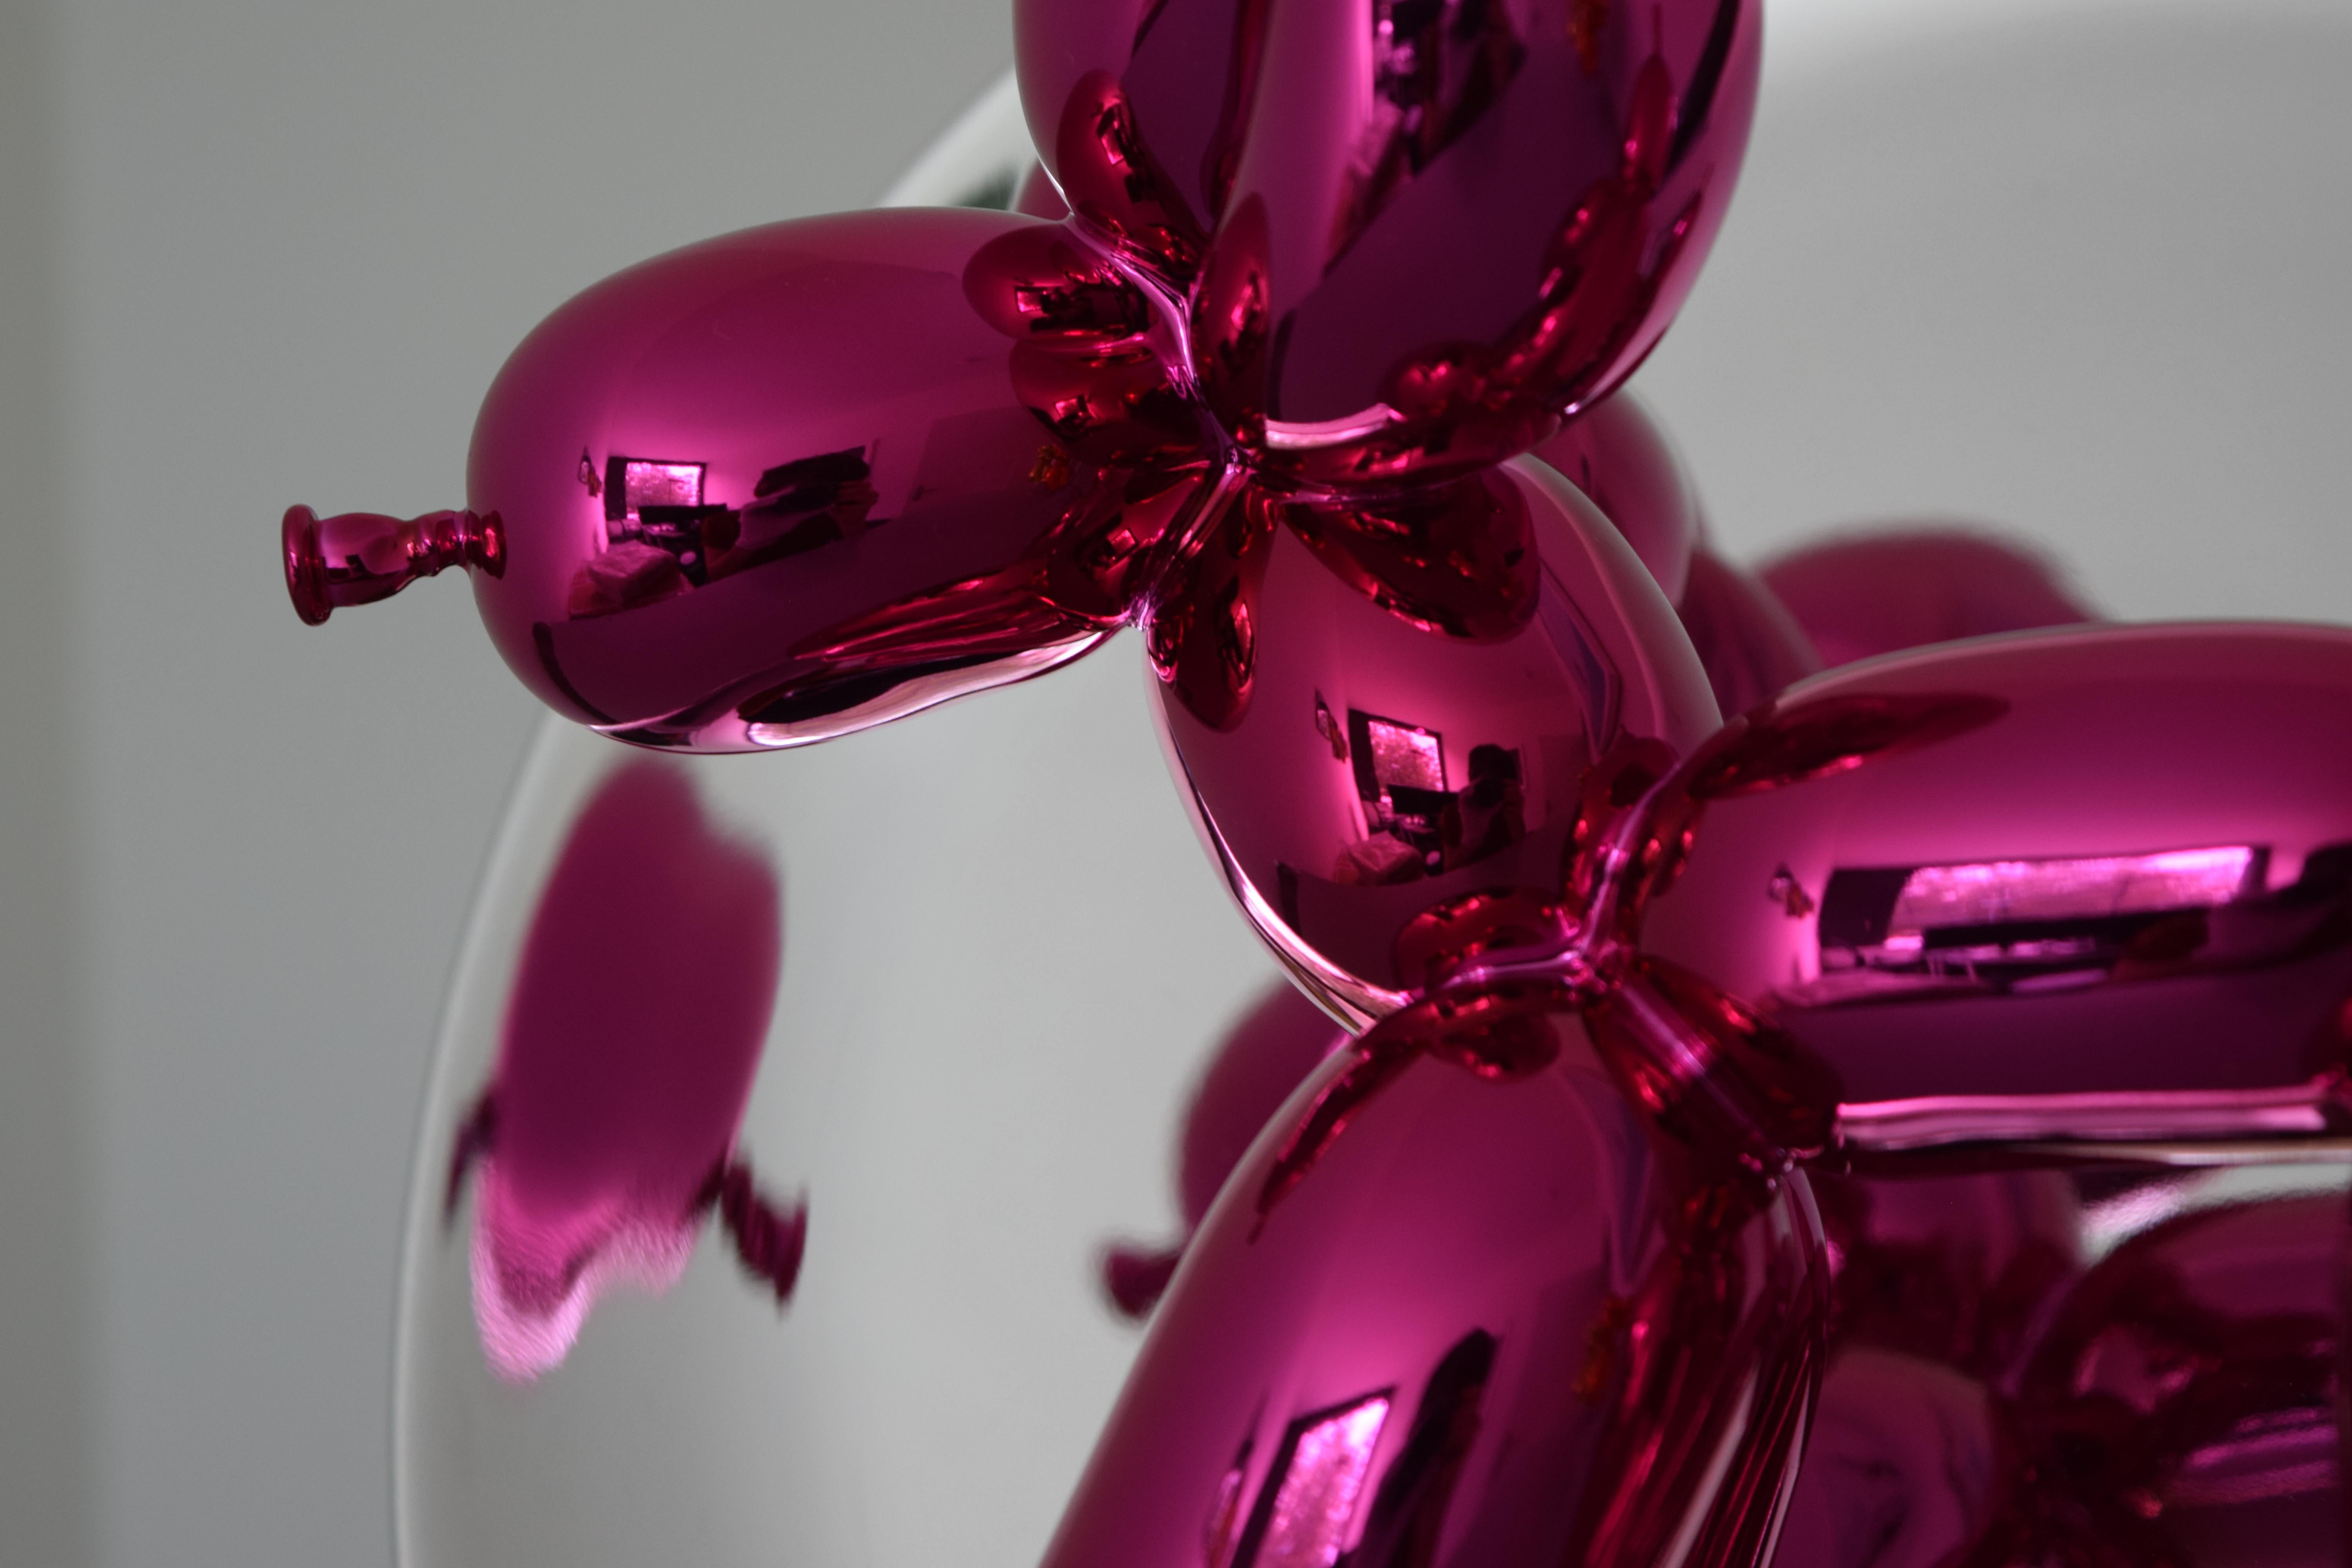 Magenta Balloon Dog Iconic Sculpture by Jeff Koons, Porcelain, Contemporary Art For Sale 9